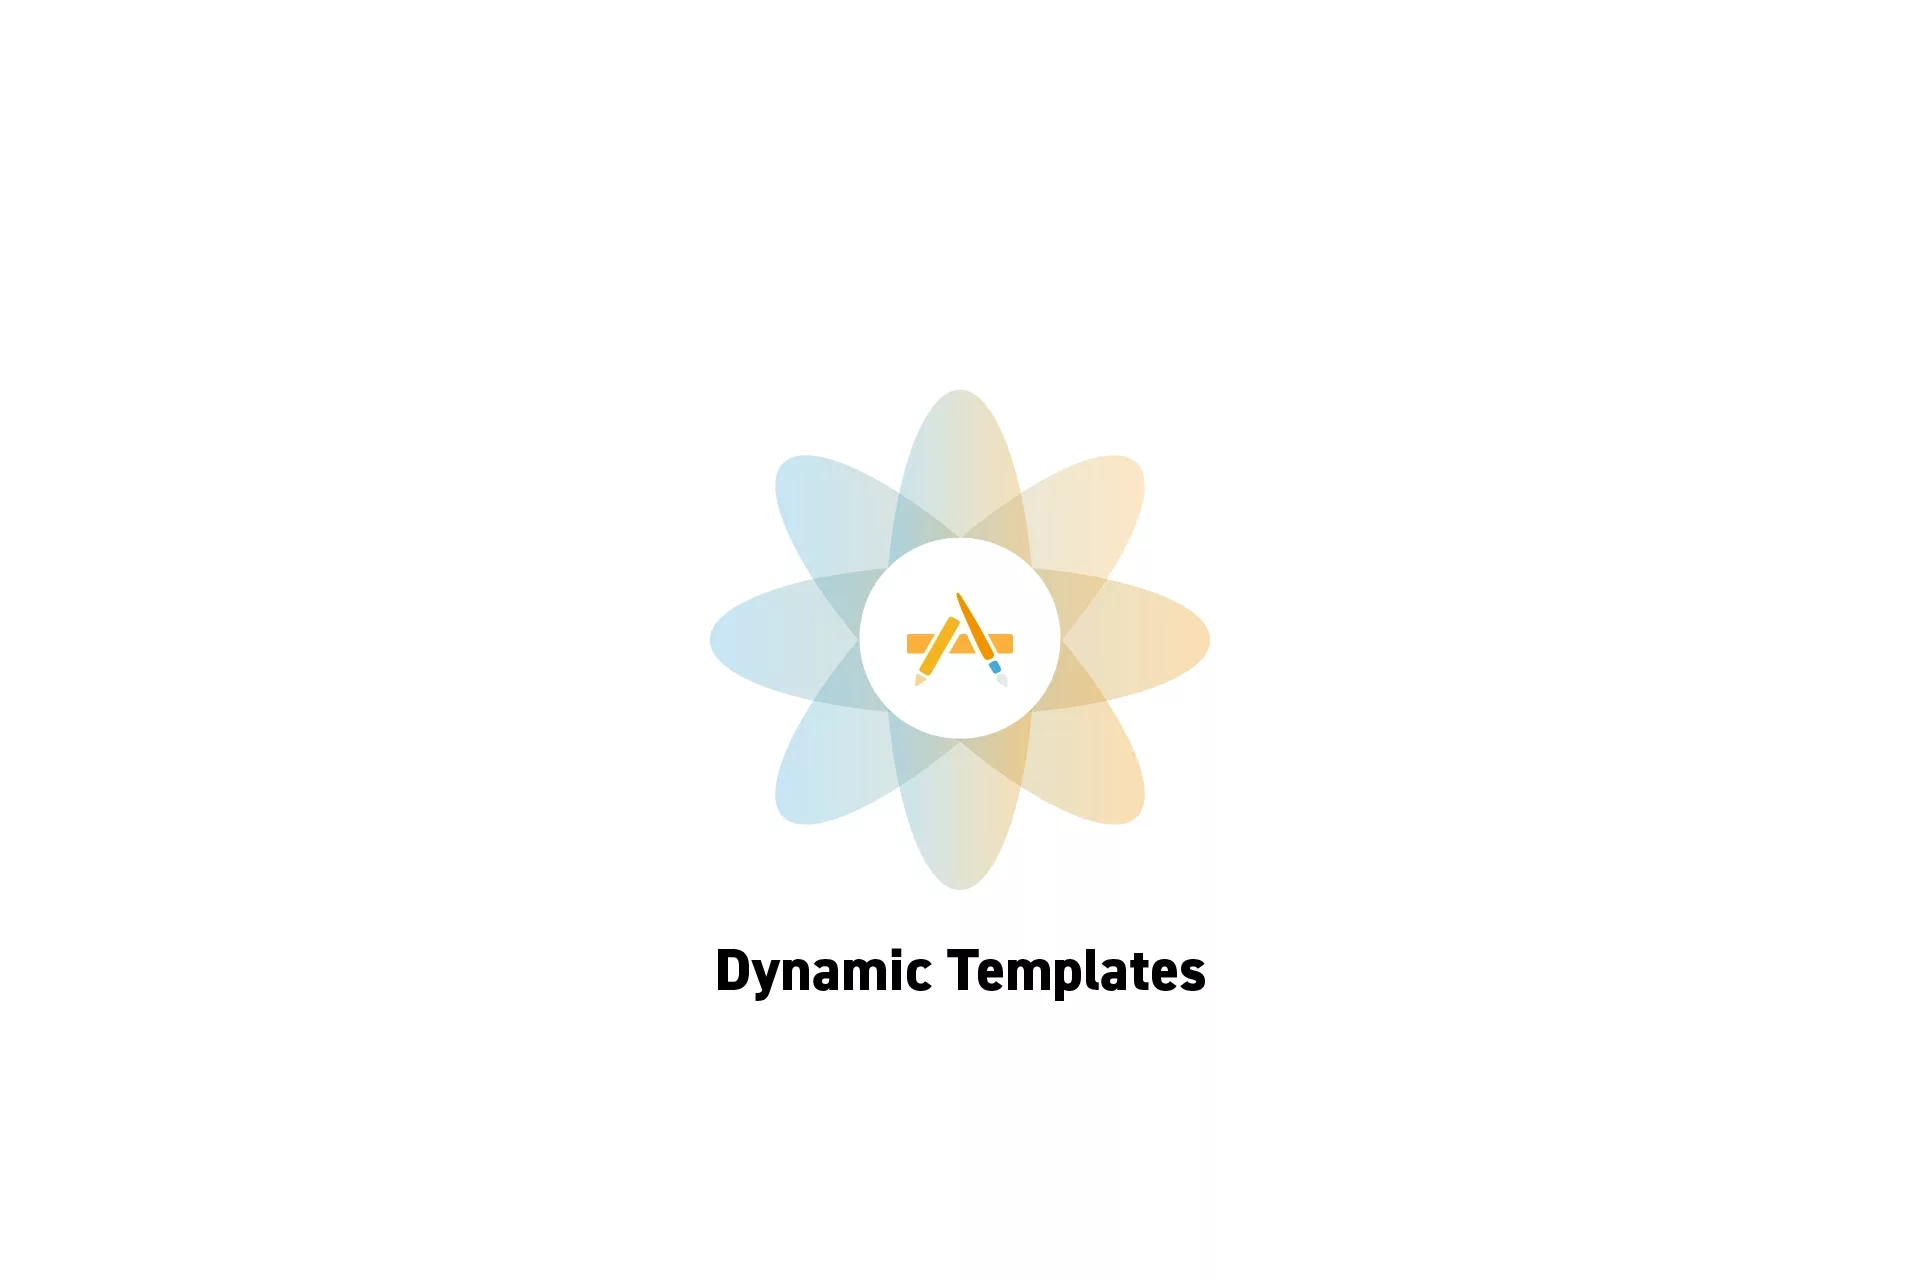 A flower that represents Digital Craft with the text "Dynamic Templates" beneath it.